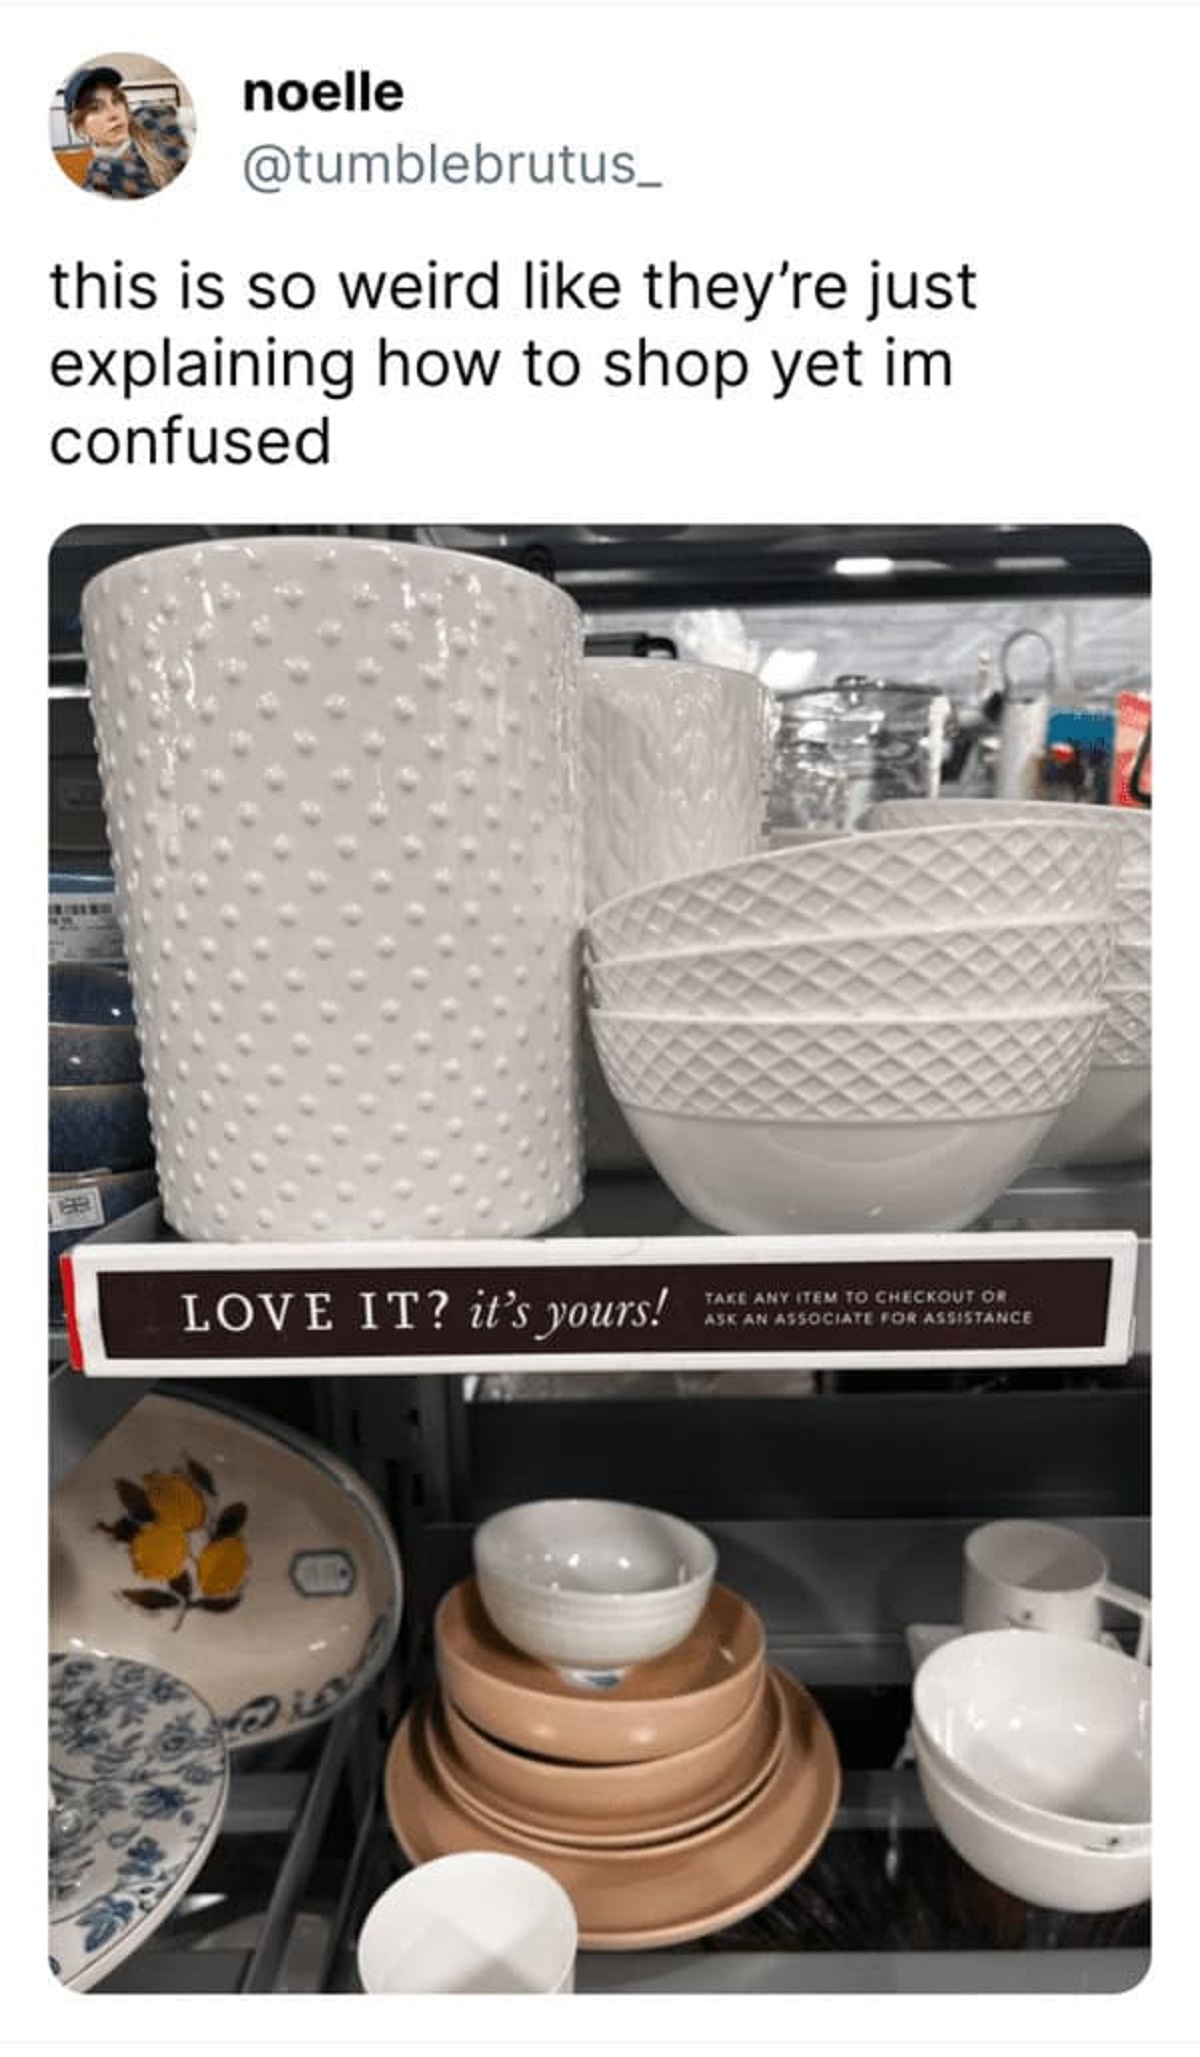 ceramic - noelle this is so weird they're just explaining how to shop yet im confused Love It? it's yours! Take Any Item To Checkout Or Ask An Associate For Assistance